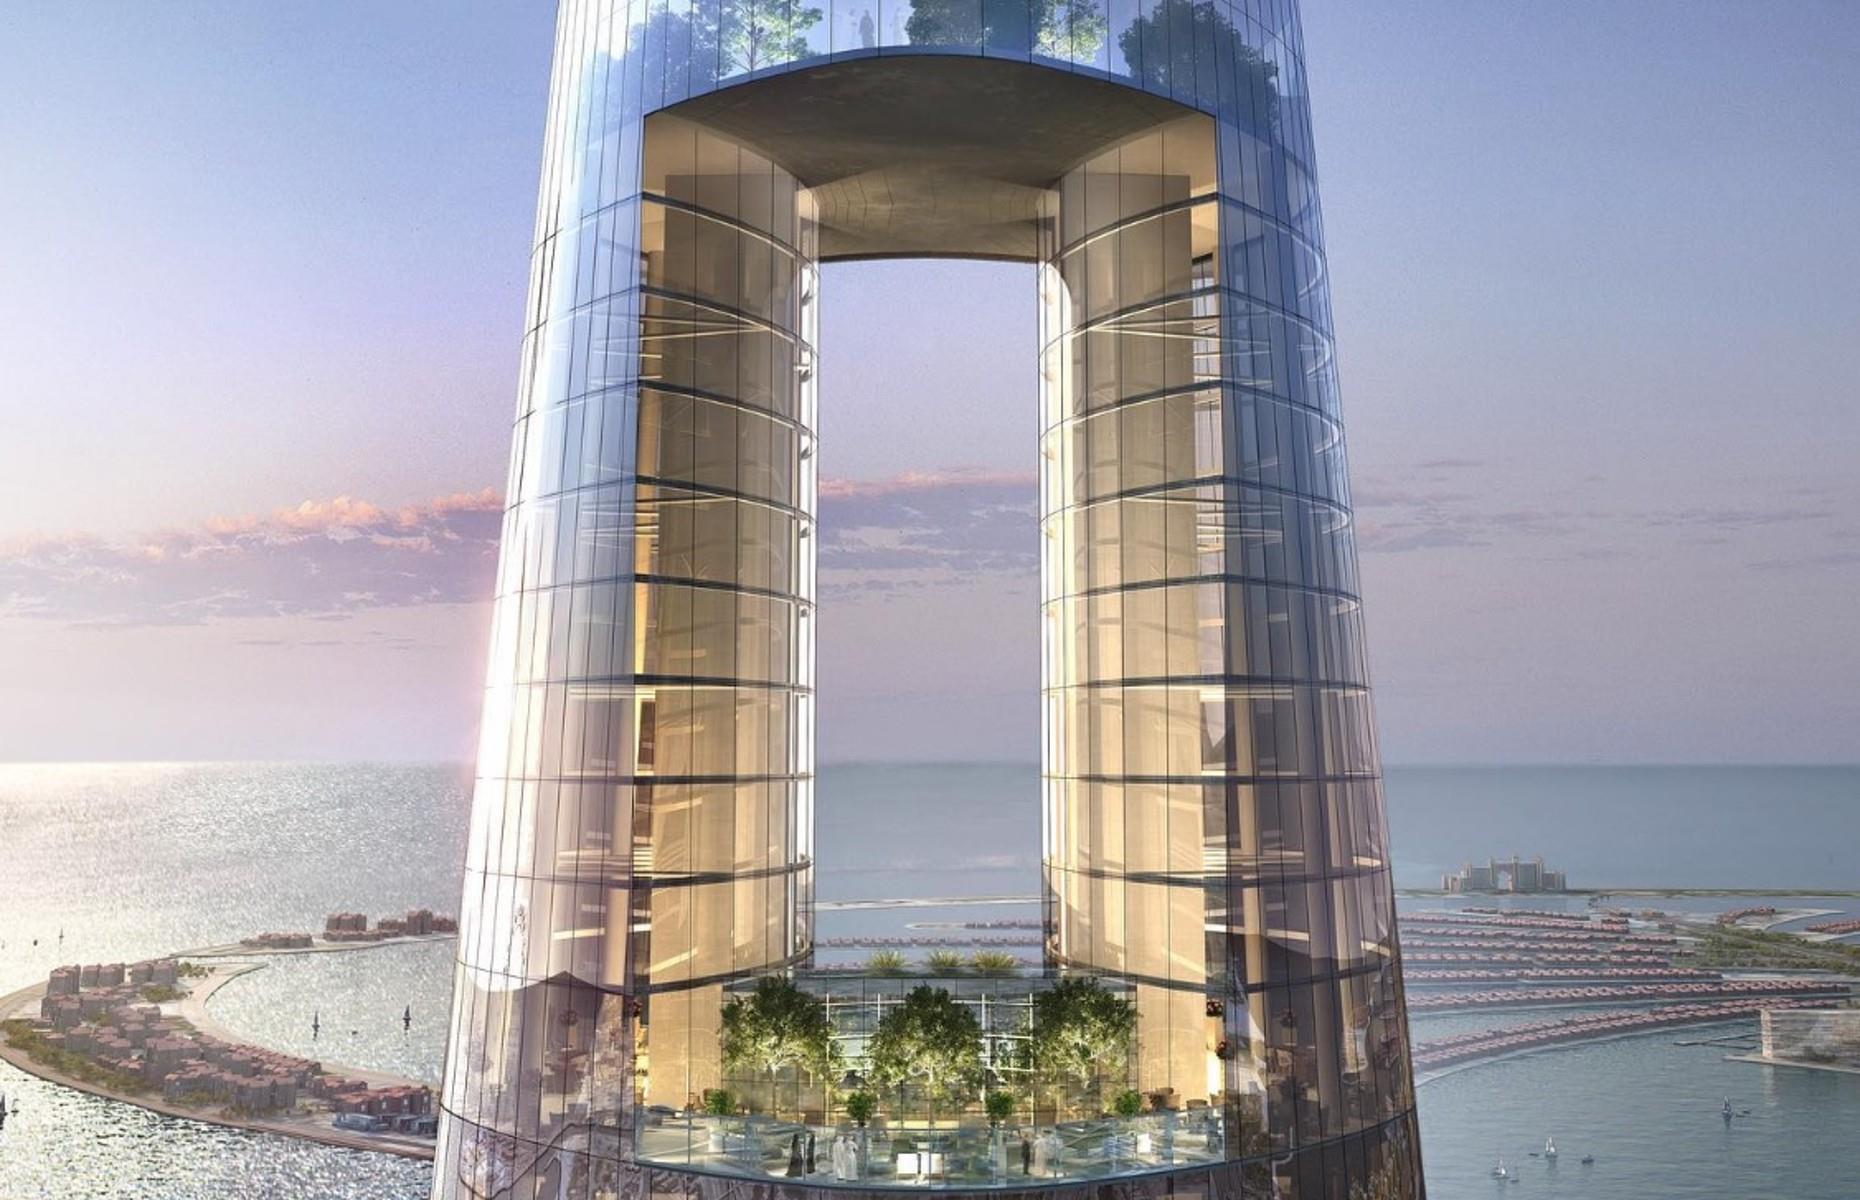 <p>The mammoth building will house more than one thousand rooms and suites, while 82 floors will be taken up by a 984-foot (300m) atrium filled with vertically stacked gardens and terraces. There will also be a rooftop infinity pool and terrace, four restaurants and several bars. In March 2022, <a href="https://www.thenationalnews.com/business/property/2022/03/01/dubai-megaproject-worlds-tallest-hotel-ciel-reaches-construction-milestone/">it was reported that construction had reached the half-way point</a>, with the hotel expected to open sometime in 2024. </p>  <p><a href="https://www.loveexploring.com/gallerylist/132122/the-worlds-tallest-buildings-with-observation-decks"><strong>Next, discover the world's tallest buildings with observation decks</strong></a></p>